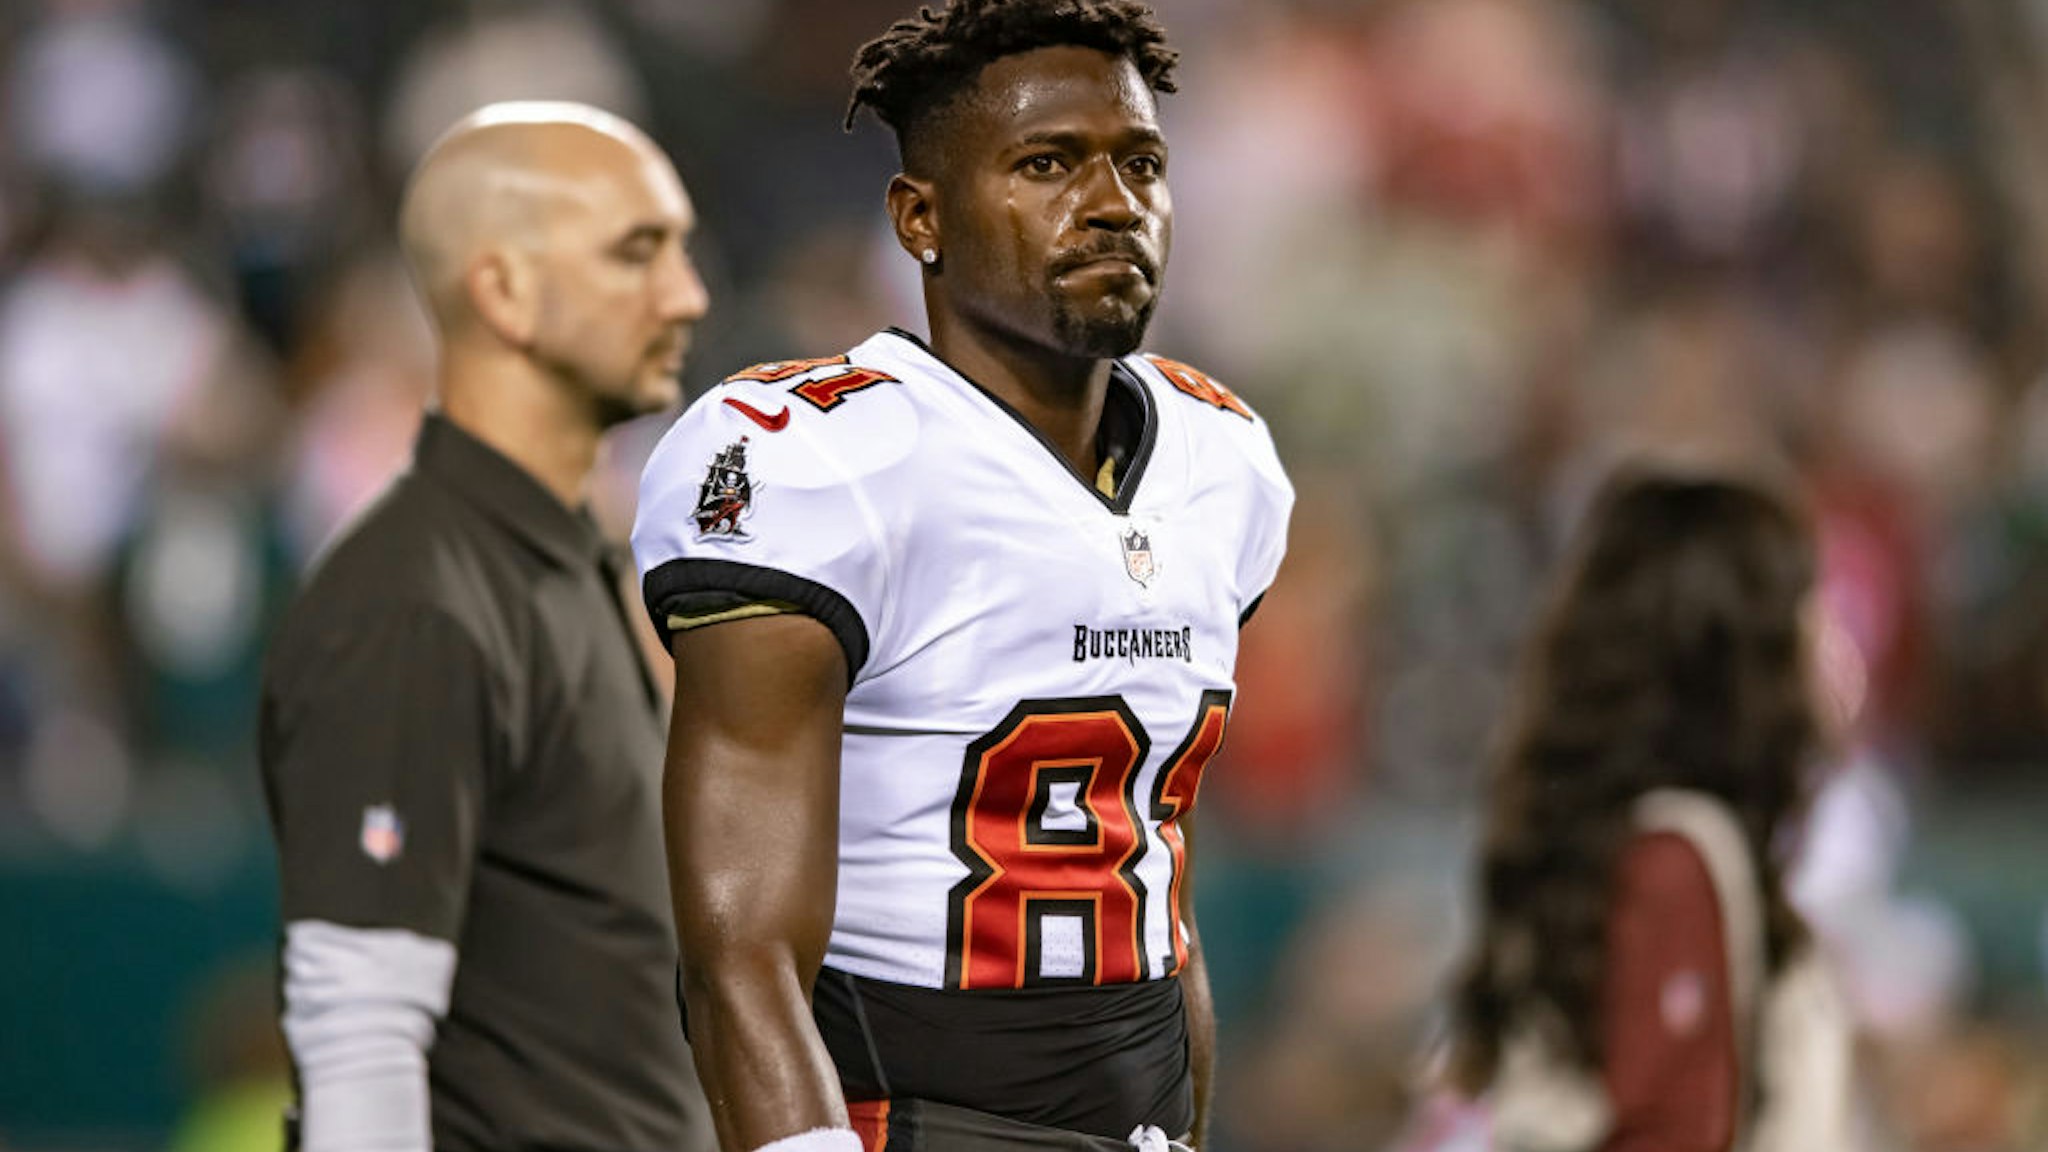 PHILADELPHIA, PA - OCTOBER 14: Tampa Bay Buccaneers wide receiver Antonio Brown (81) is pictured prior to the game between the Tampa Bay Buccaneers and Philadelphia Eagles on October 14, 2021 at Lincoln Financial Field in Philadelphia, PA. (Photo by John Jones/Icon Sportswire via Getty Images)